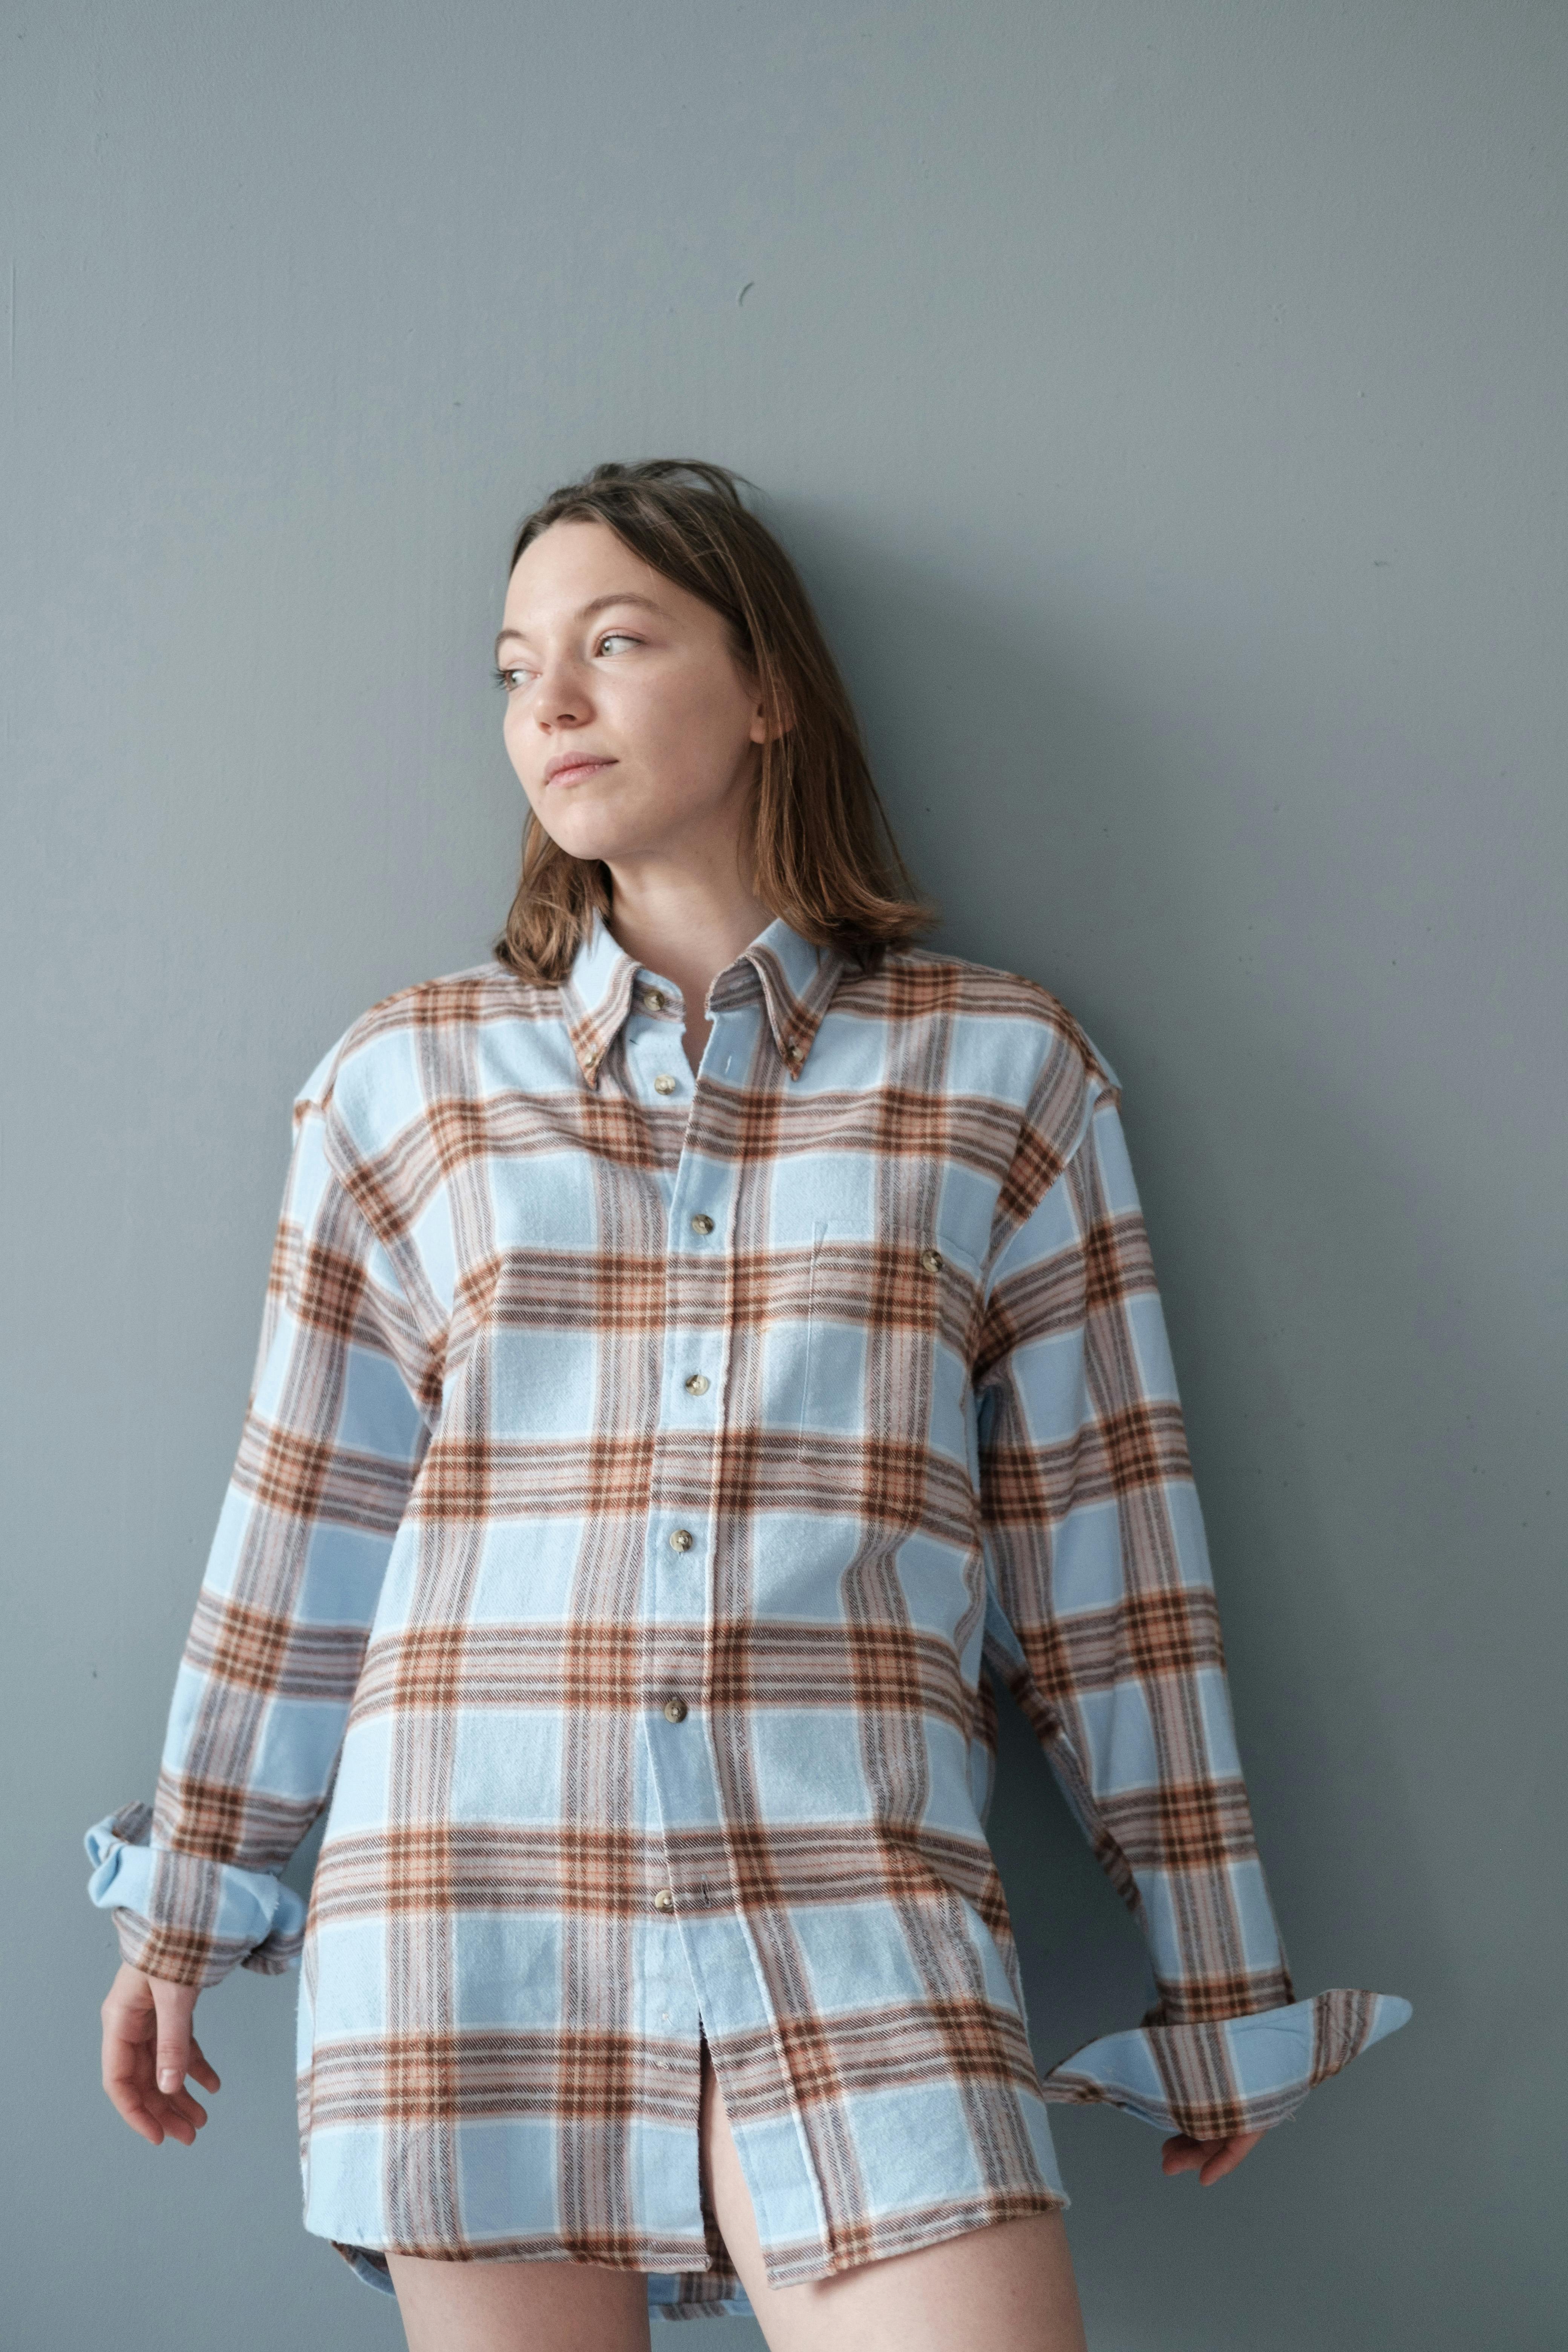 woman in blue white and red plaid button up long sleeve shirt